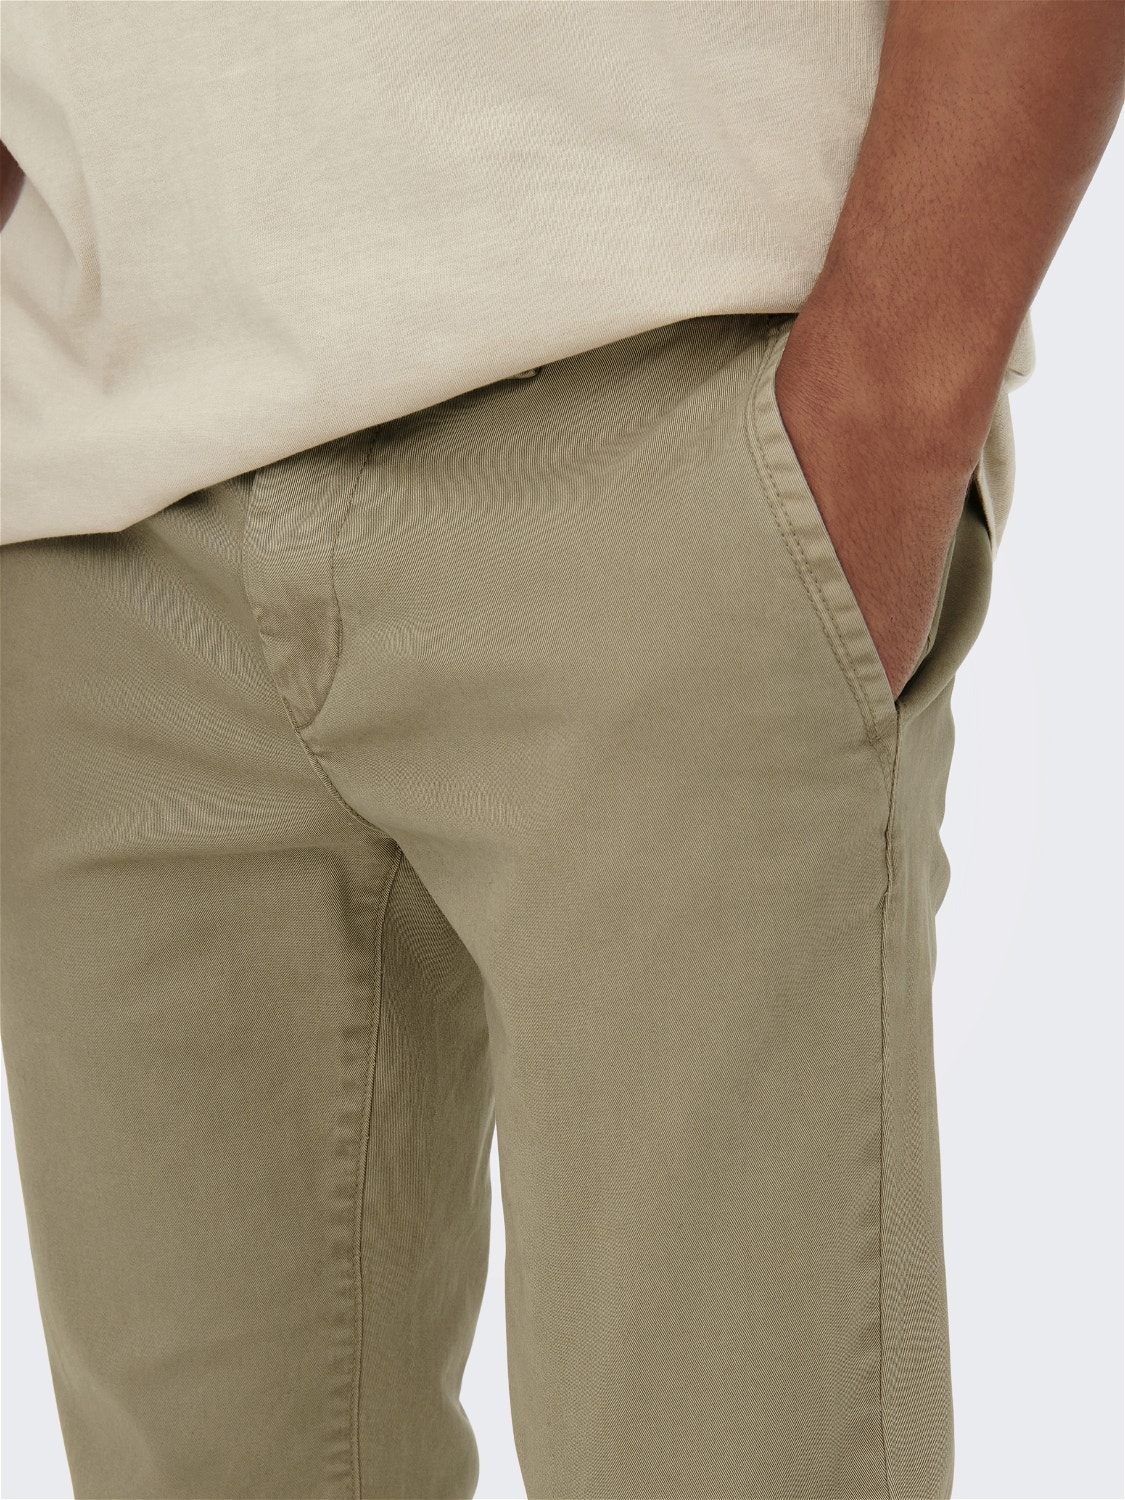 with 20 discount! SONS® Fit & | ONLY Slim Chinos